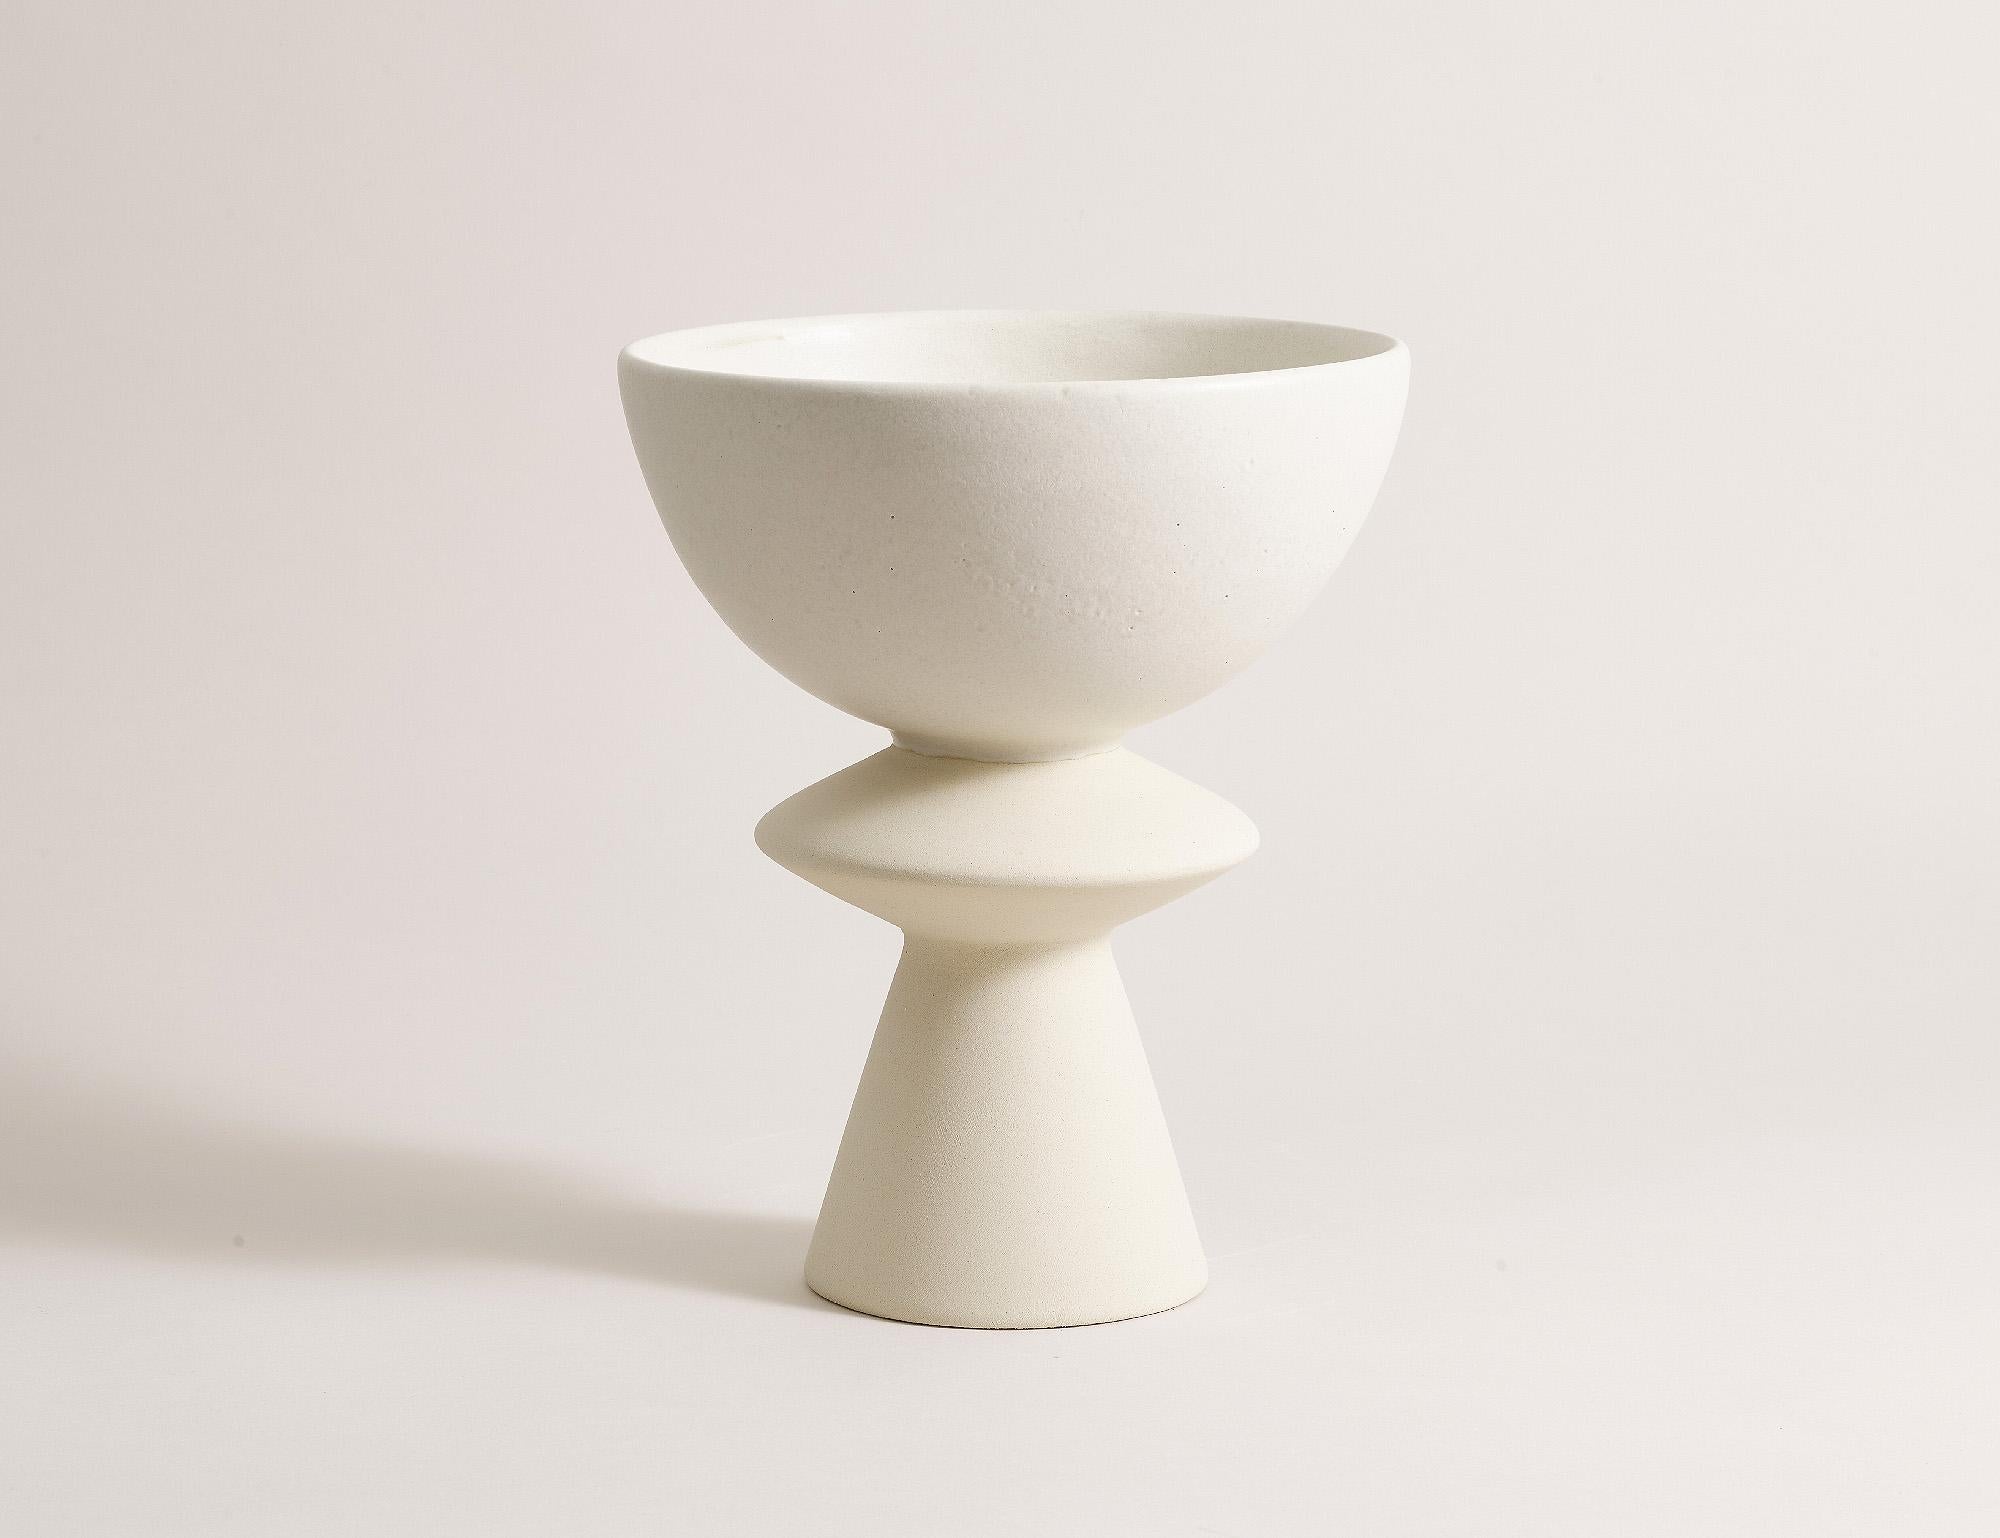 Handcrafted 012 Coupe by Lovebuch
Dimensions: Ø 21 x H 26 cm
Materials: Sandstone, handcrafted piece

Katia works with wood and clay, these raw, powerfully expressive materials are shaped to create a poetry of objects that inhabit our daily